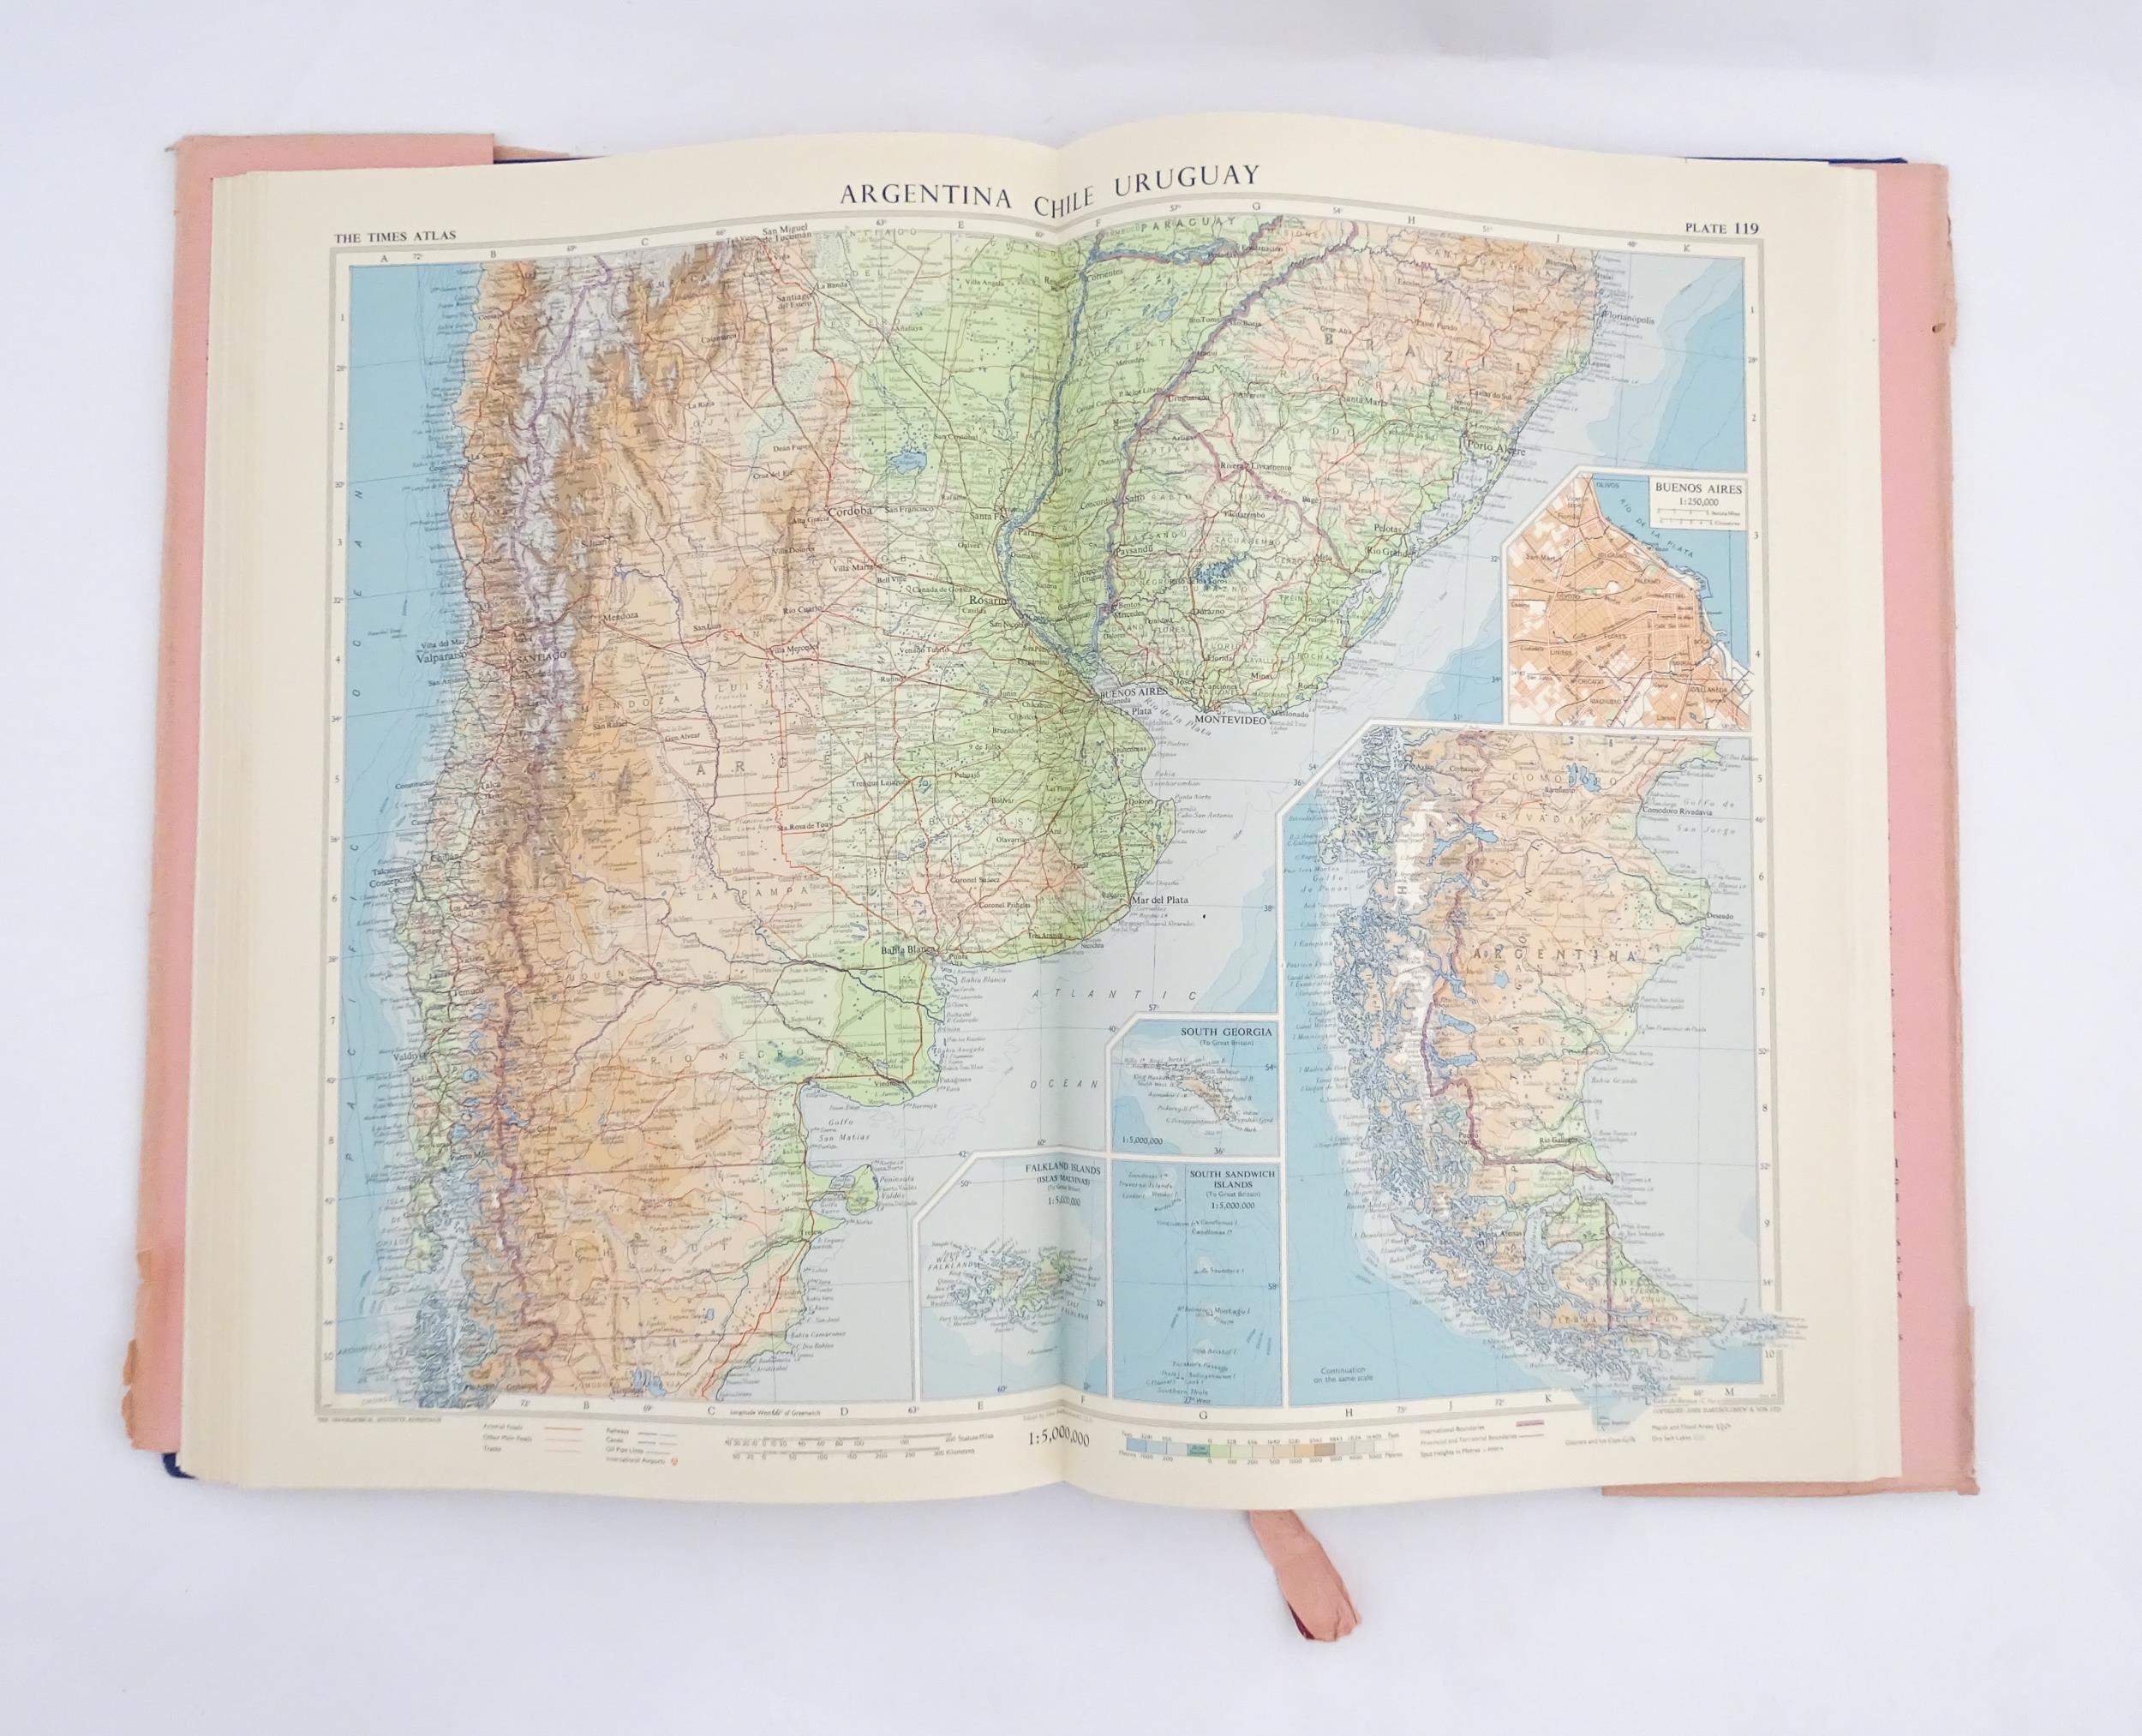 Books: The Time Atlas of the World, Volume 5 - The Americas, edited by John Bartholomew, 1957. - Image 4 of 10